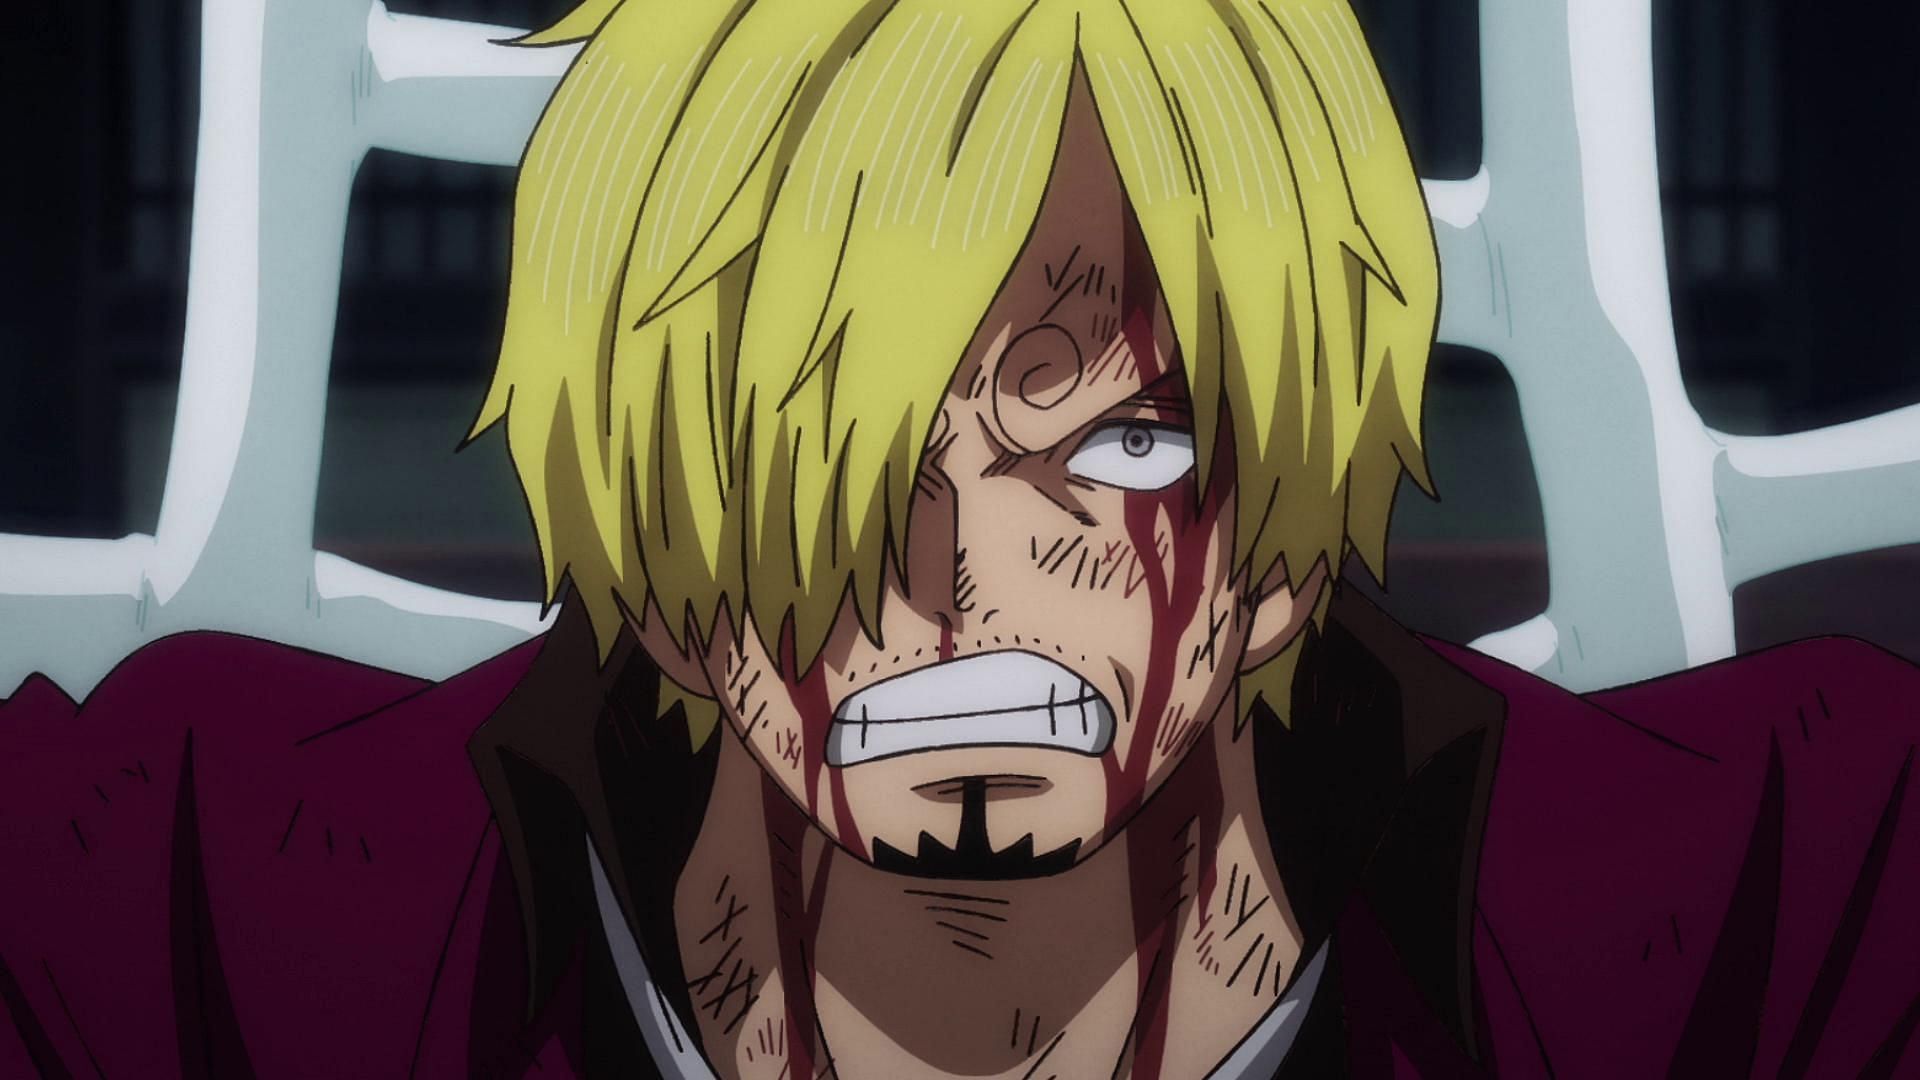 Sanji is seemingly injured after trying to oppose Saturn in One Piece chapter 1095 (Image via Toei Animation)